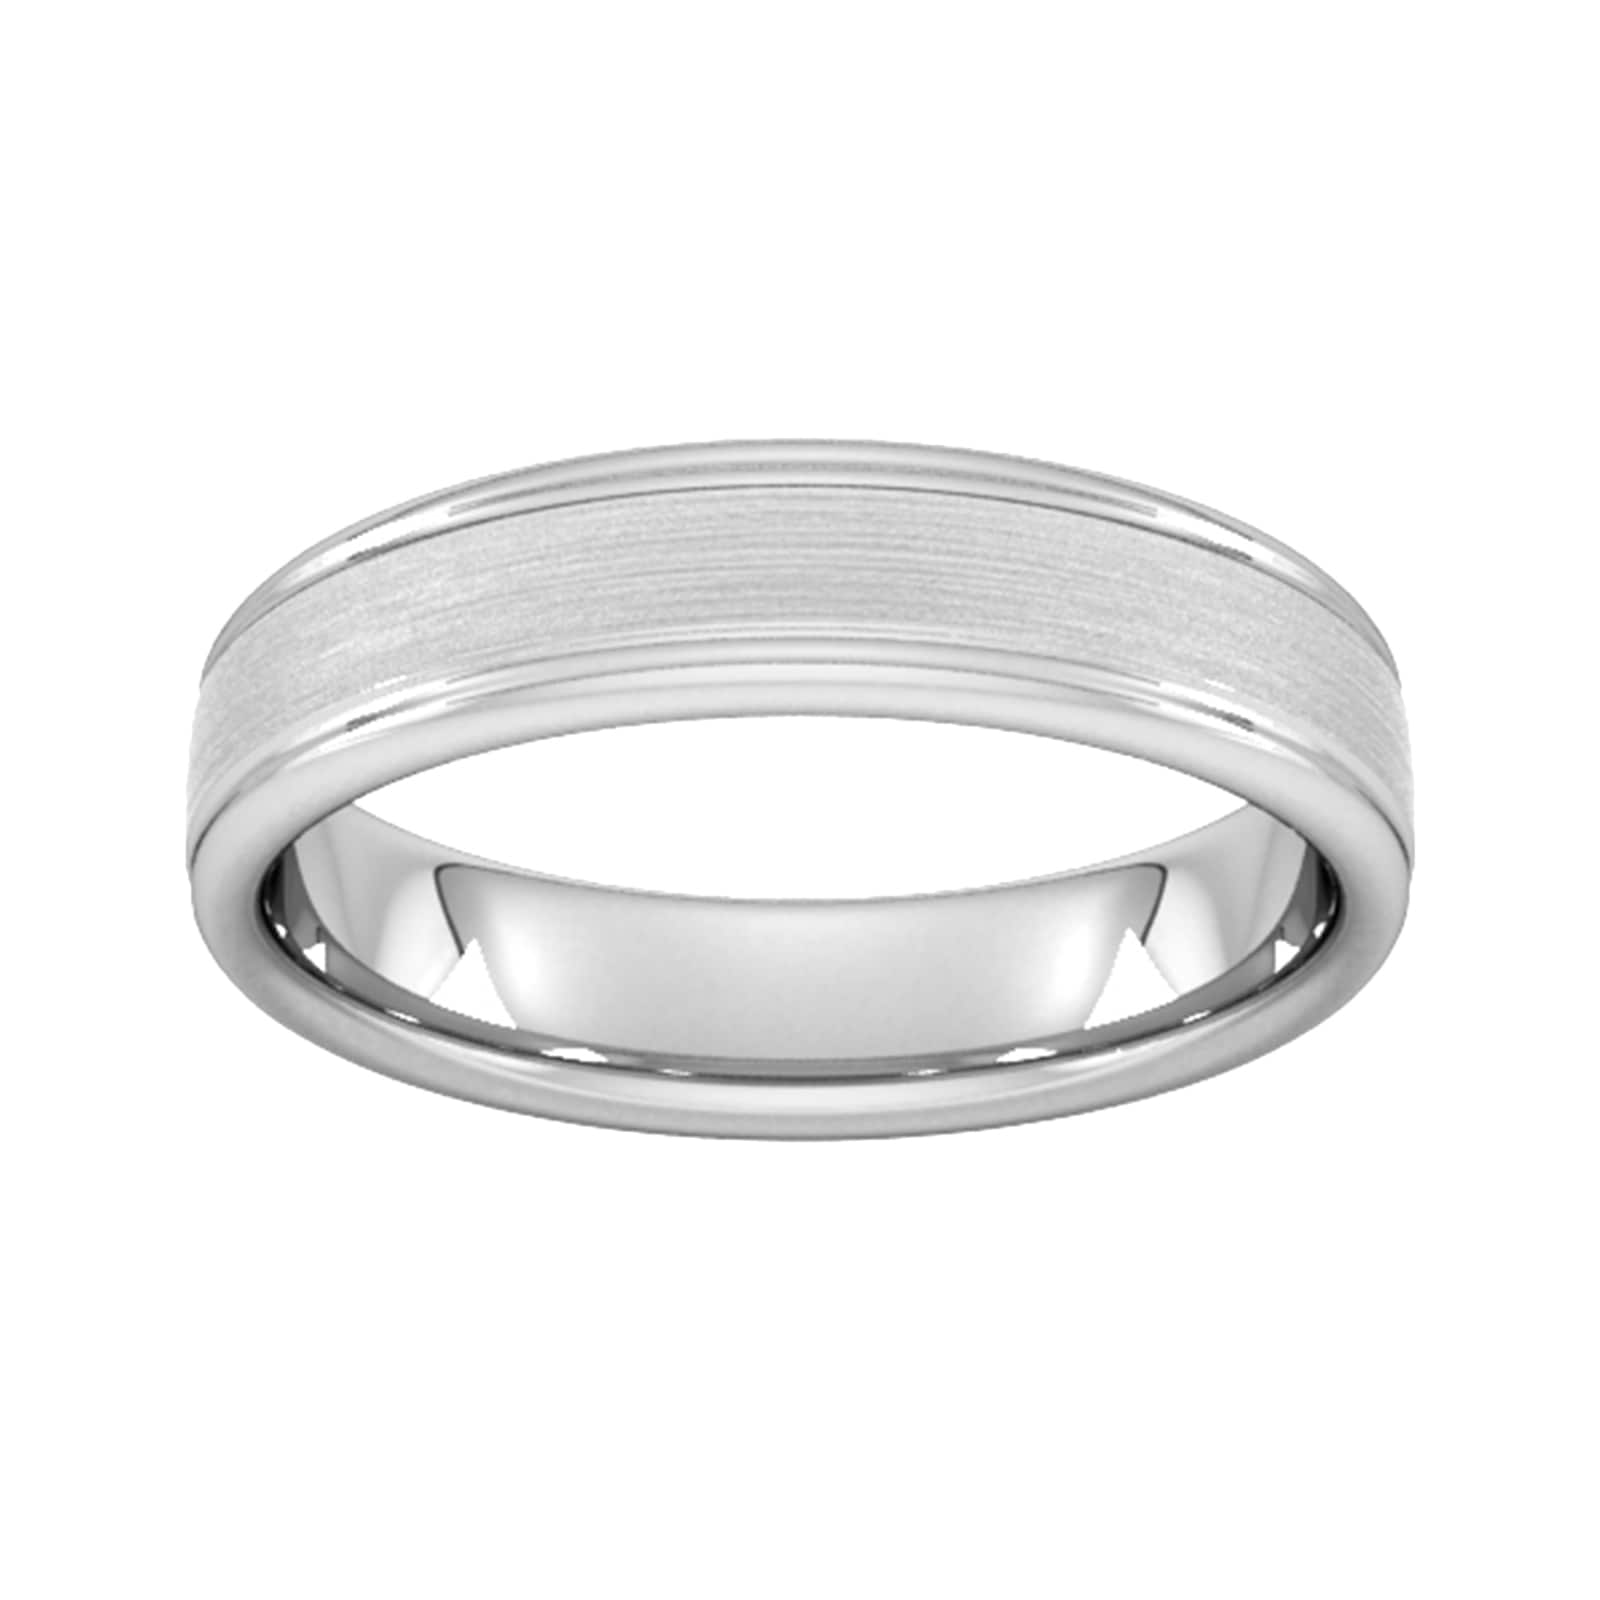 5mm Traditional Court Heavy Matt Centre With Grooves Wedding Ring In 9 Carat White Gold - Ring Size L